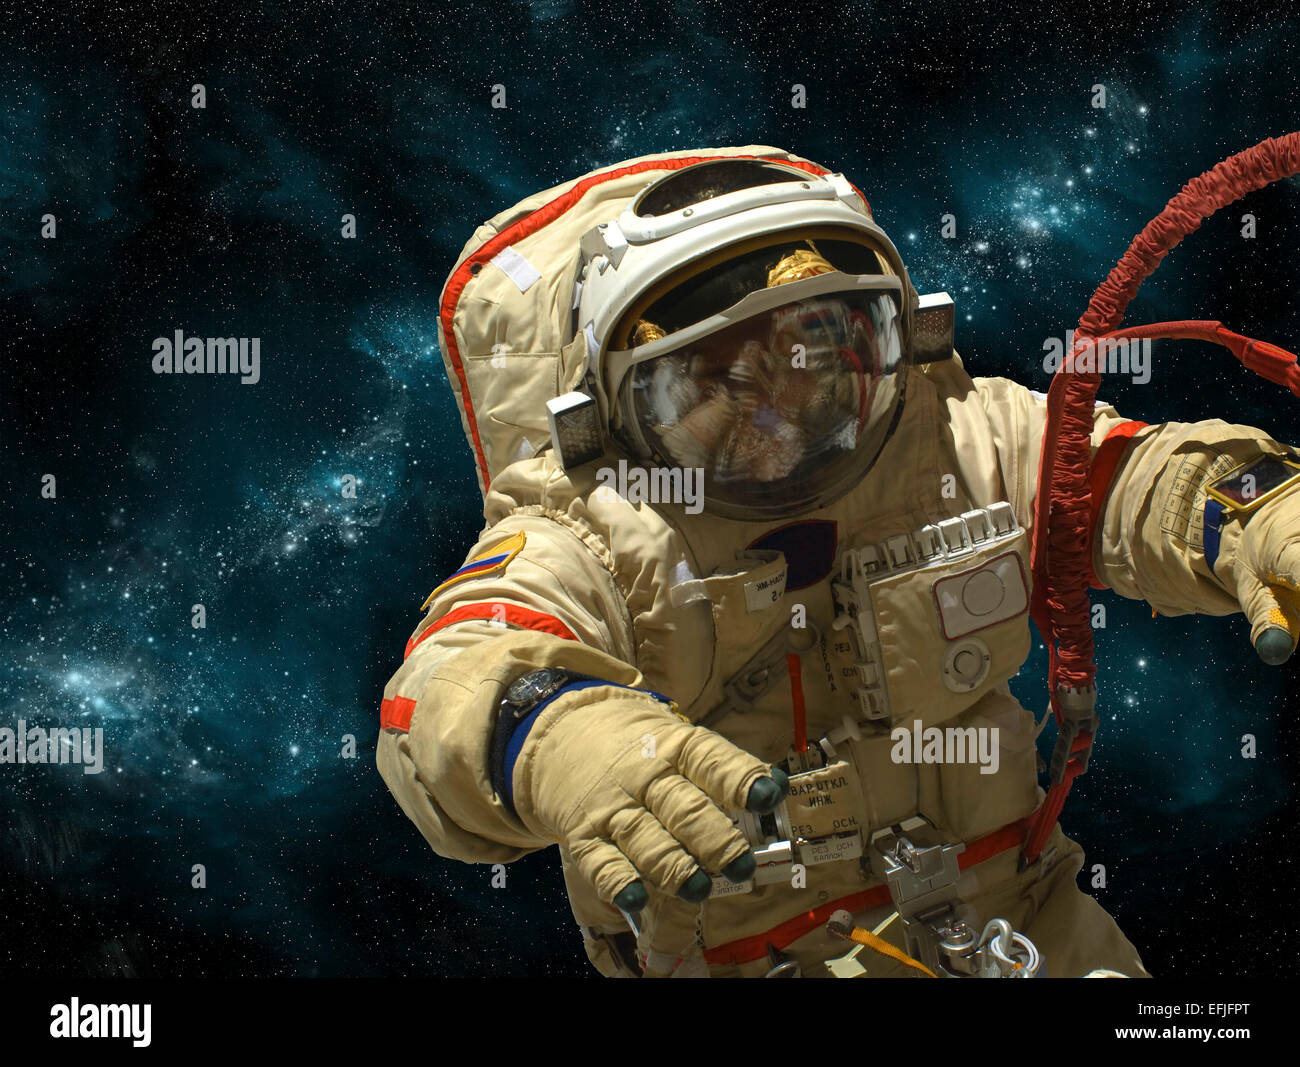 A cosmonaut floats in deep space against a background of stars and nebula. Stock Photo